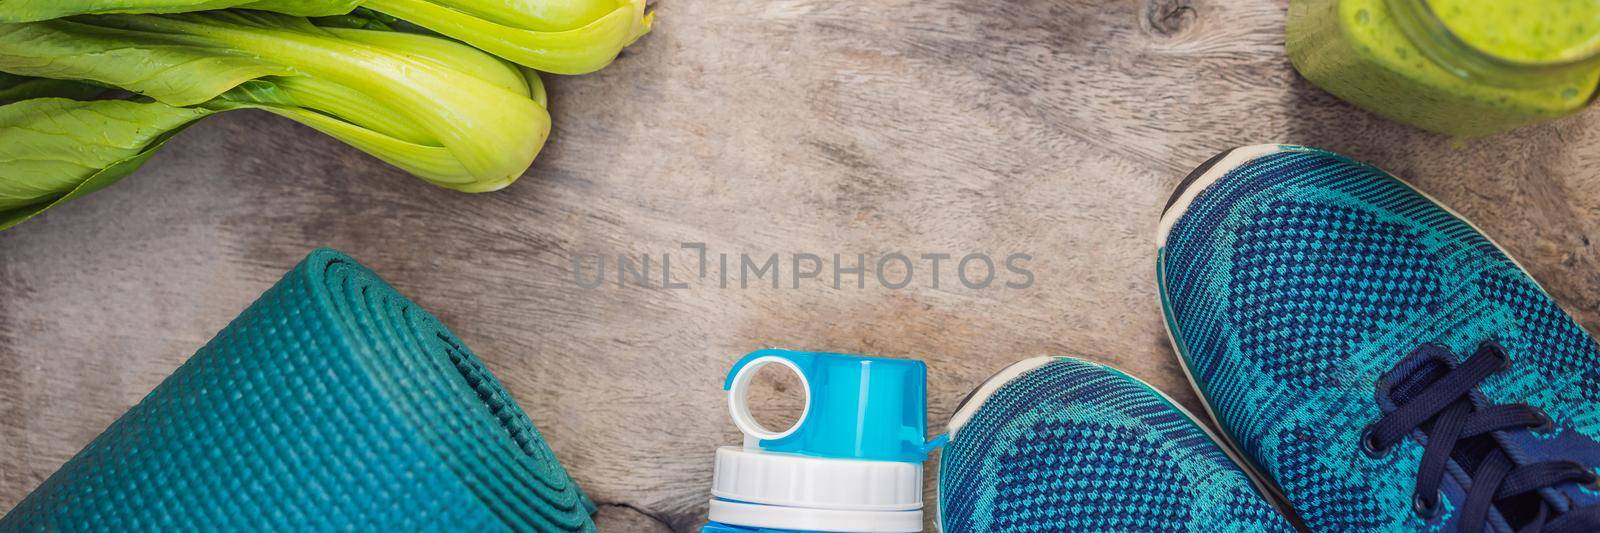 BANNER, LONG FORMAT Everything for sports turquoise, blue shades on a wooden background and spinach smoothies. Yoga mat, sport shoes sportswear and bottle of water. Concept healthy lifestyle, sport and diet. Sport equipment. Copy space by galitskaya